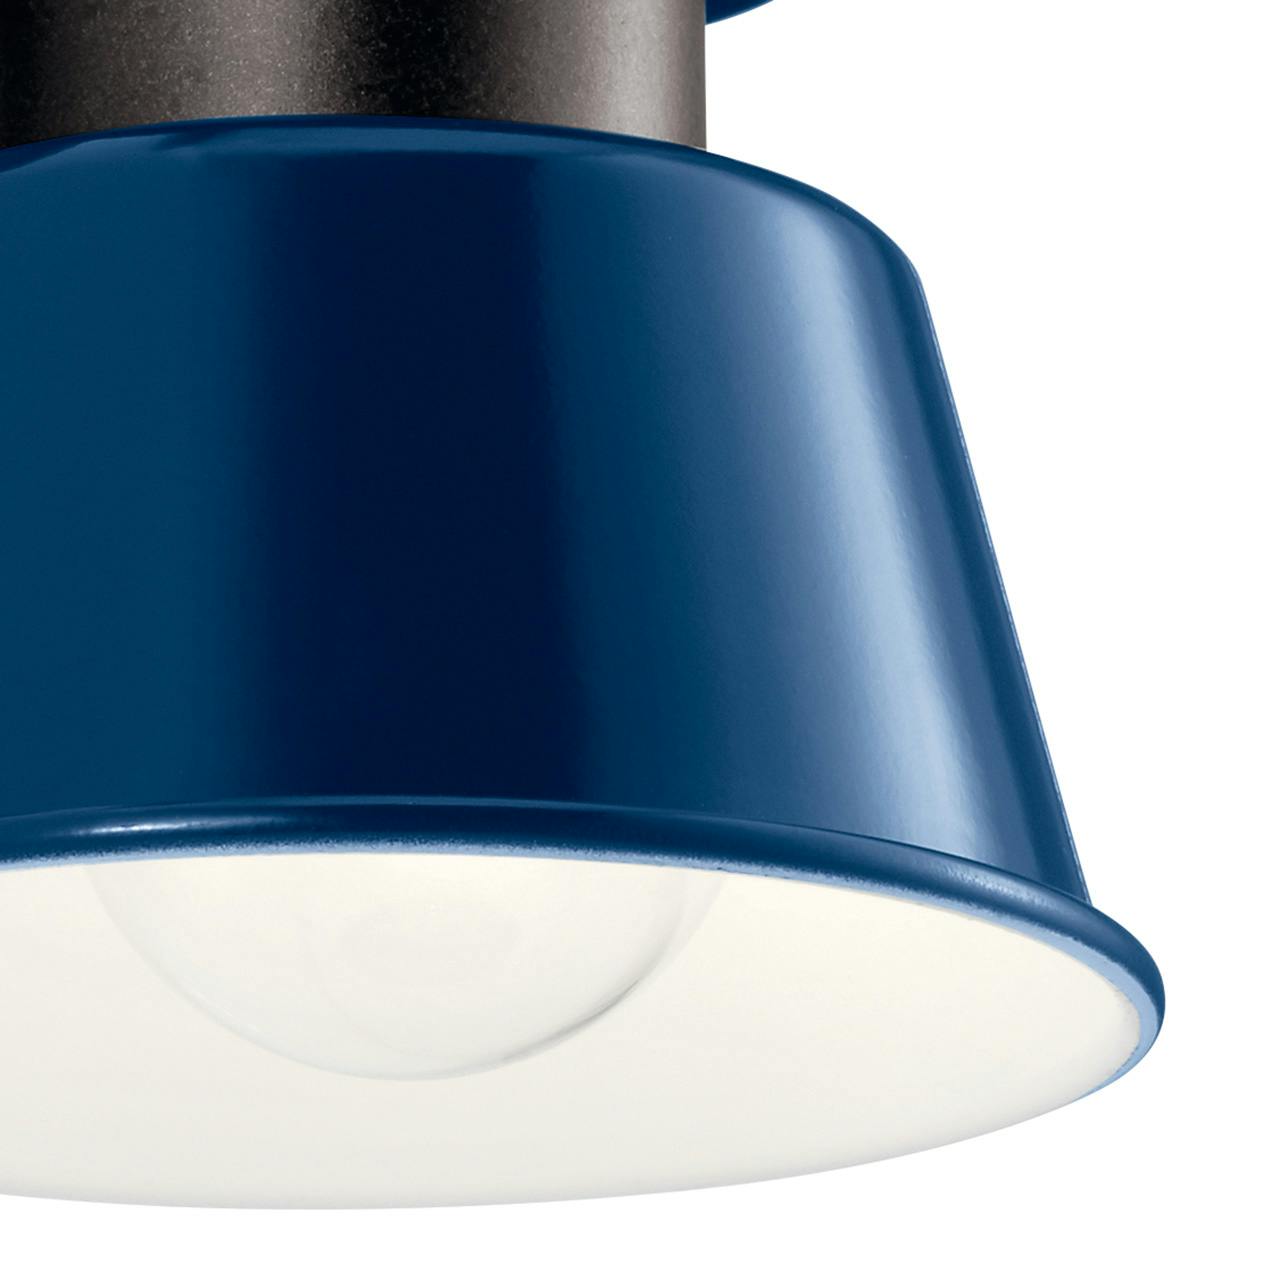 Close up view of the Lozano 8" Wall Light Catalina Blue on a white background